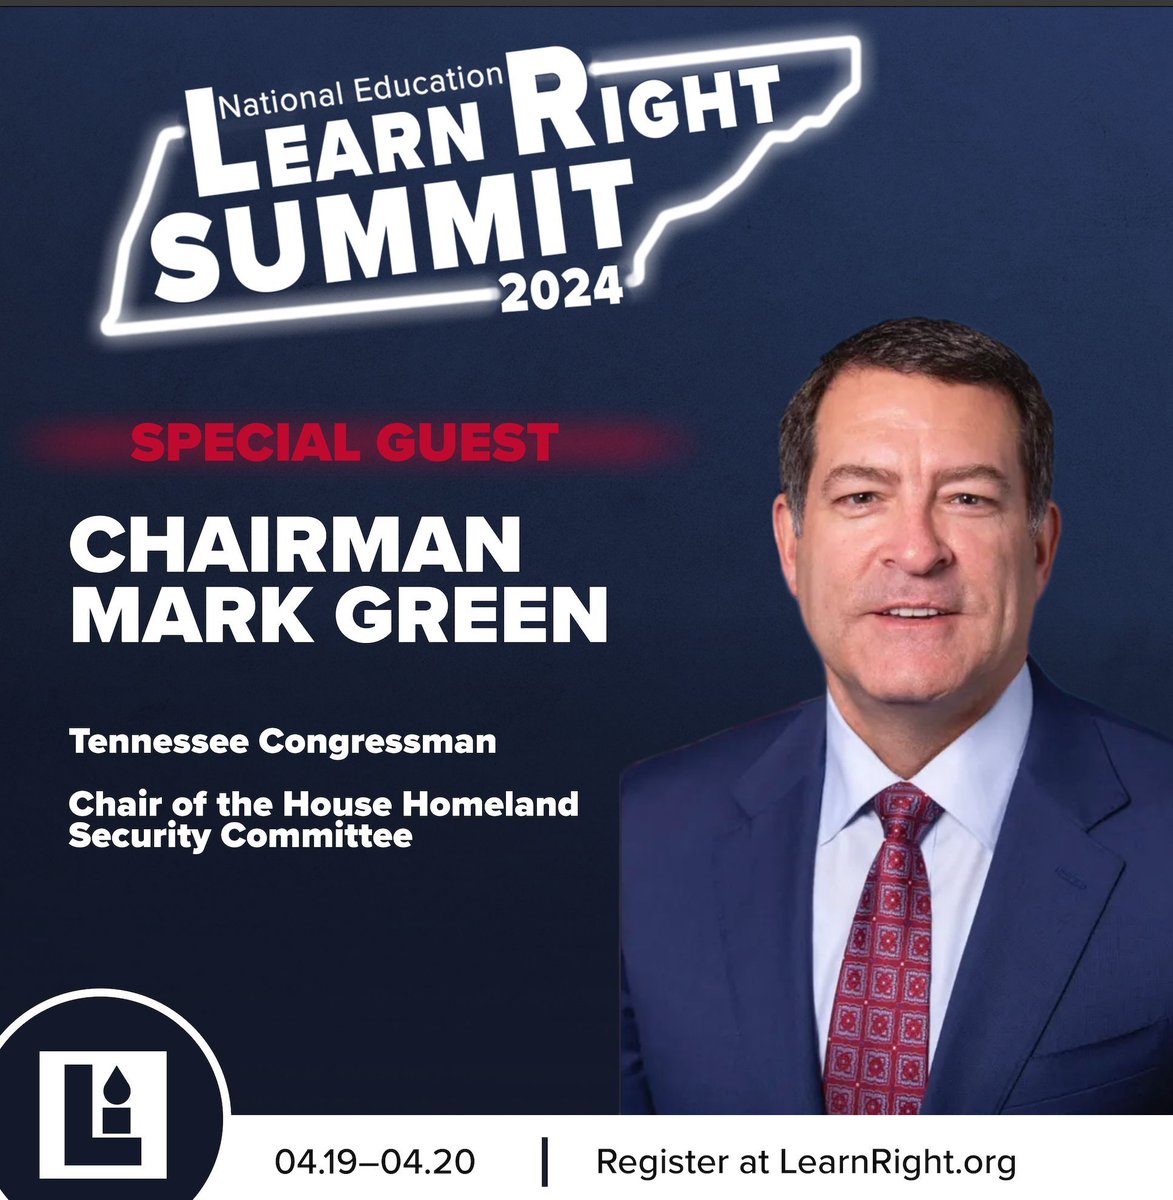 You do NOT want to miss this!

@repmarkgreen is joining us at the #learnright24 Summit in Nashville, TN this weekend!

Limited spots are available, so claim your place NOW! 

Register at Learnright.org

#markgreen #learnright #lr24 #nashville #tn #education #learnright